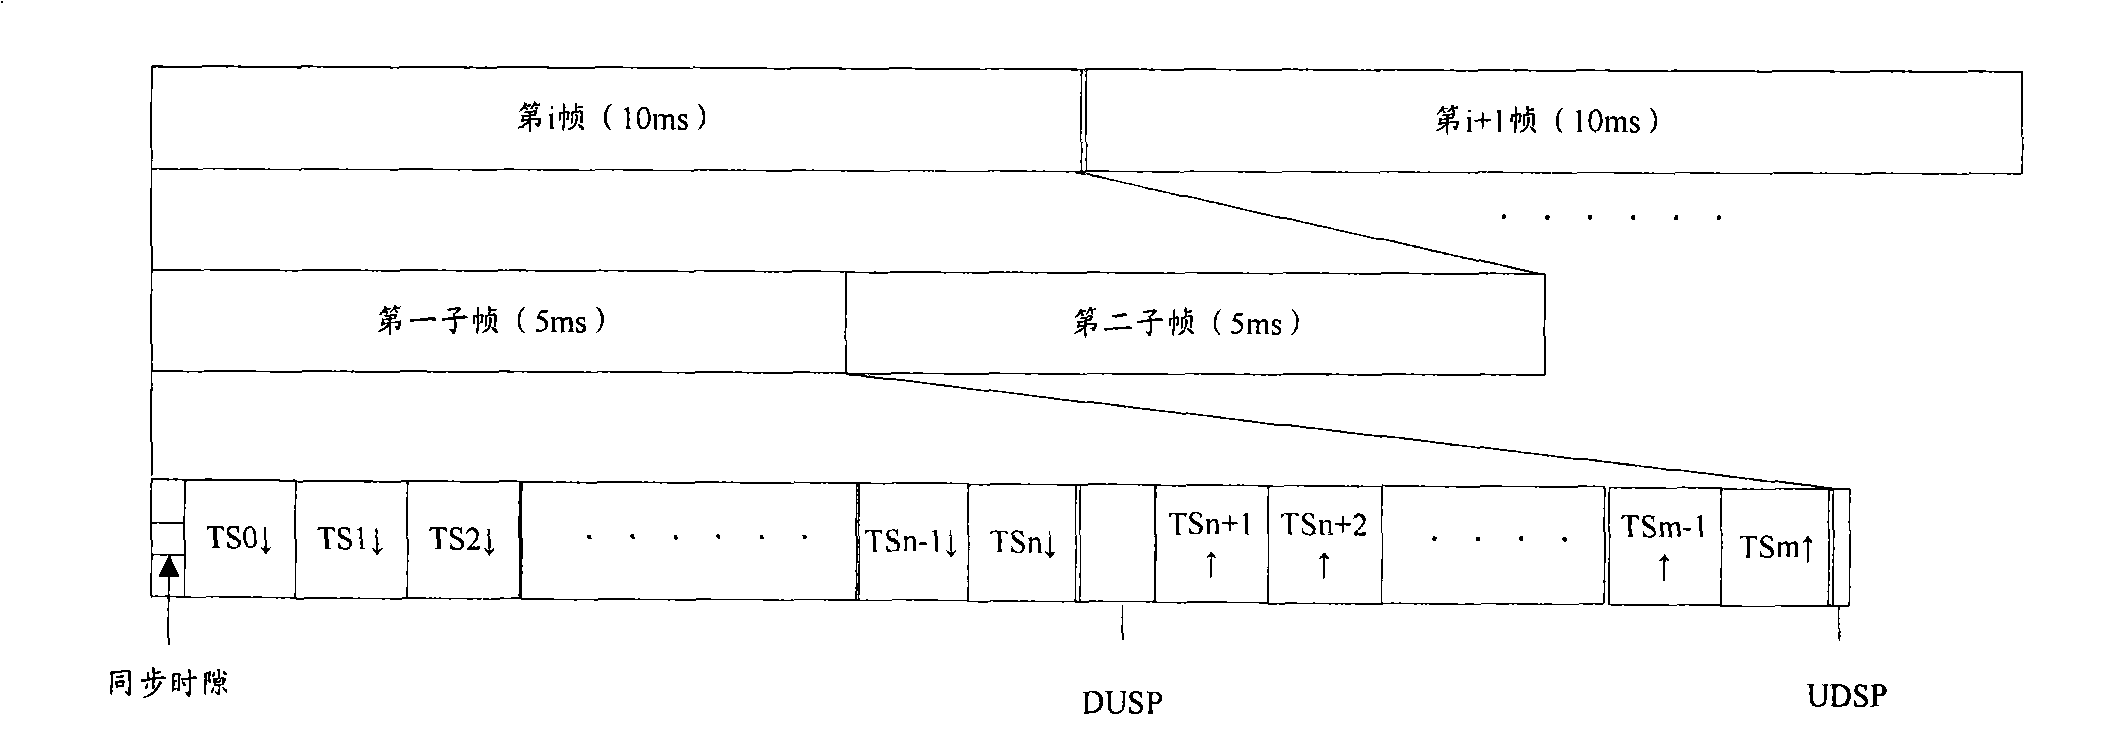 Method and apparatus for conveying down data